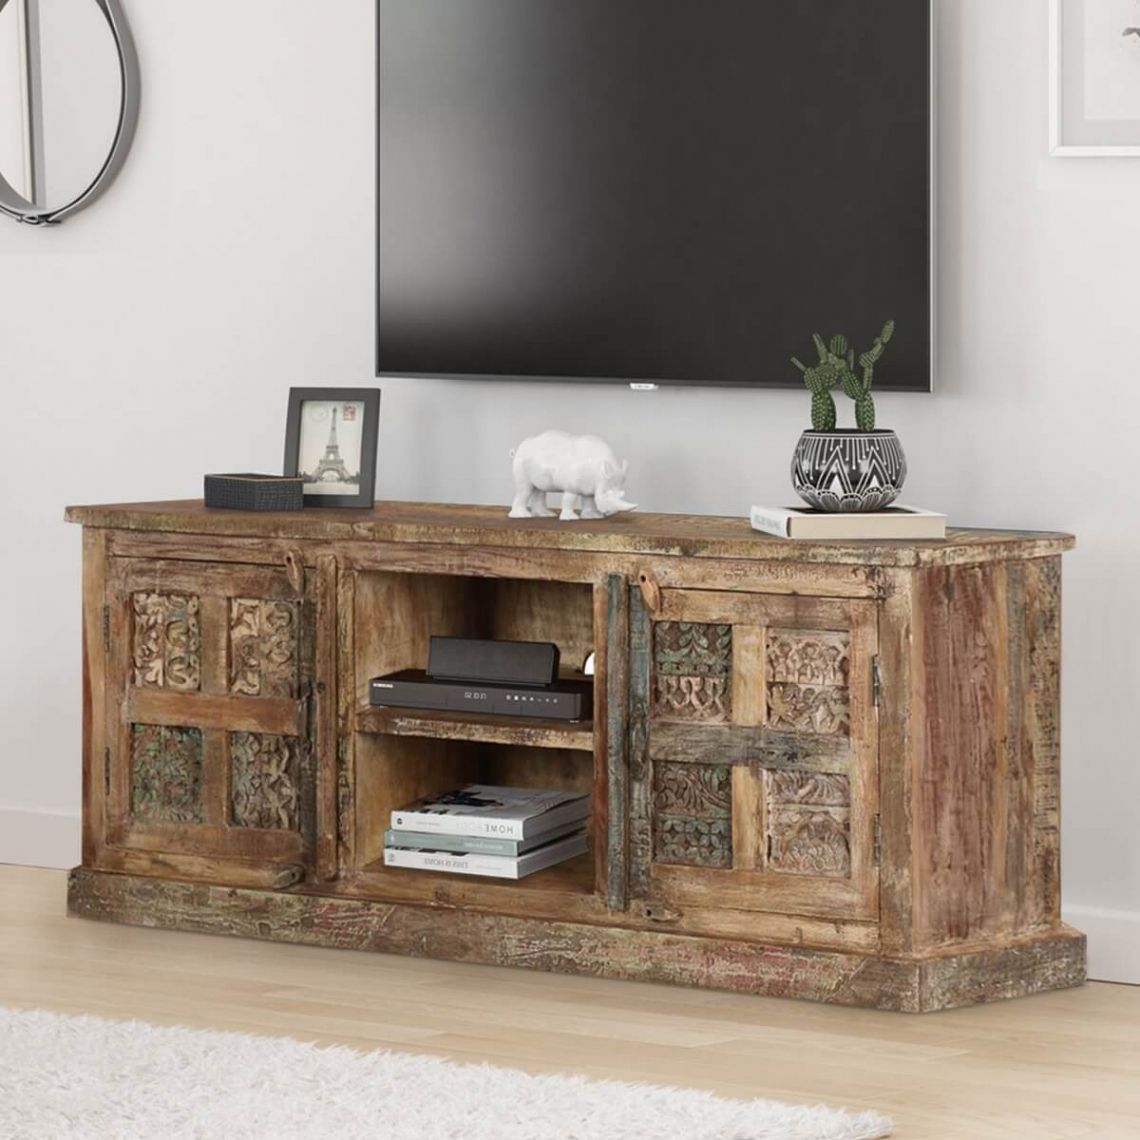 Lovely Distressed Wood Tv Stand | Ch20 Webmaster With Regard To Wooden Tv Stands (View 10 of 15)